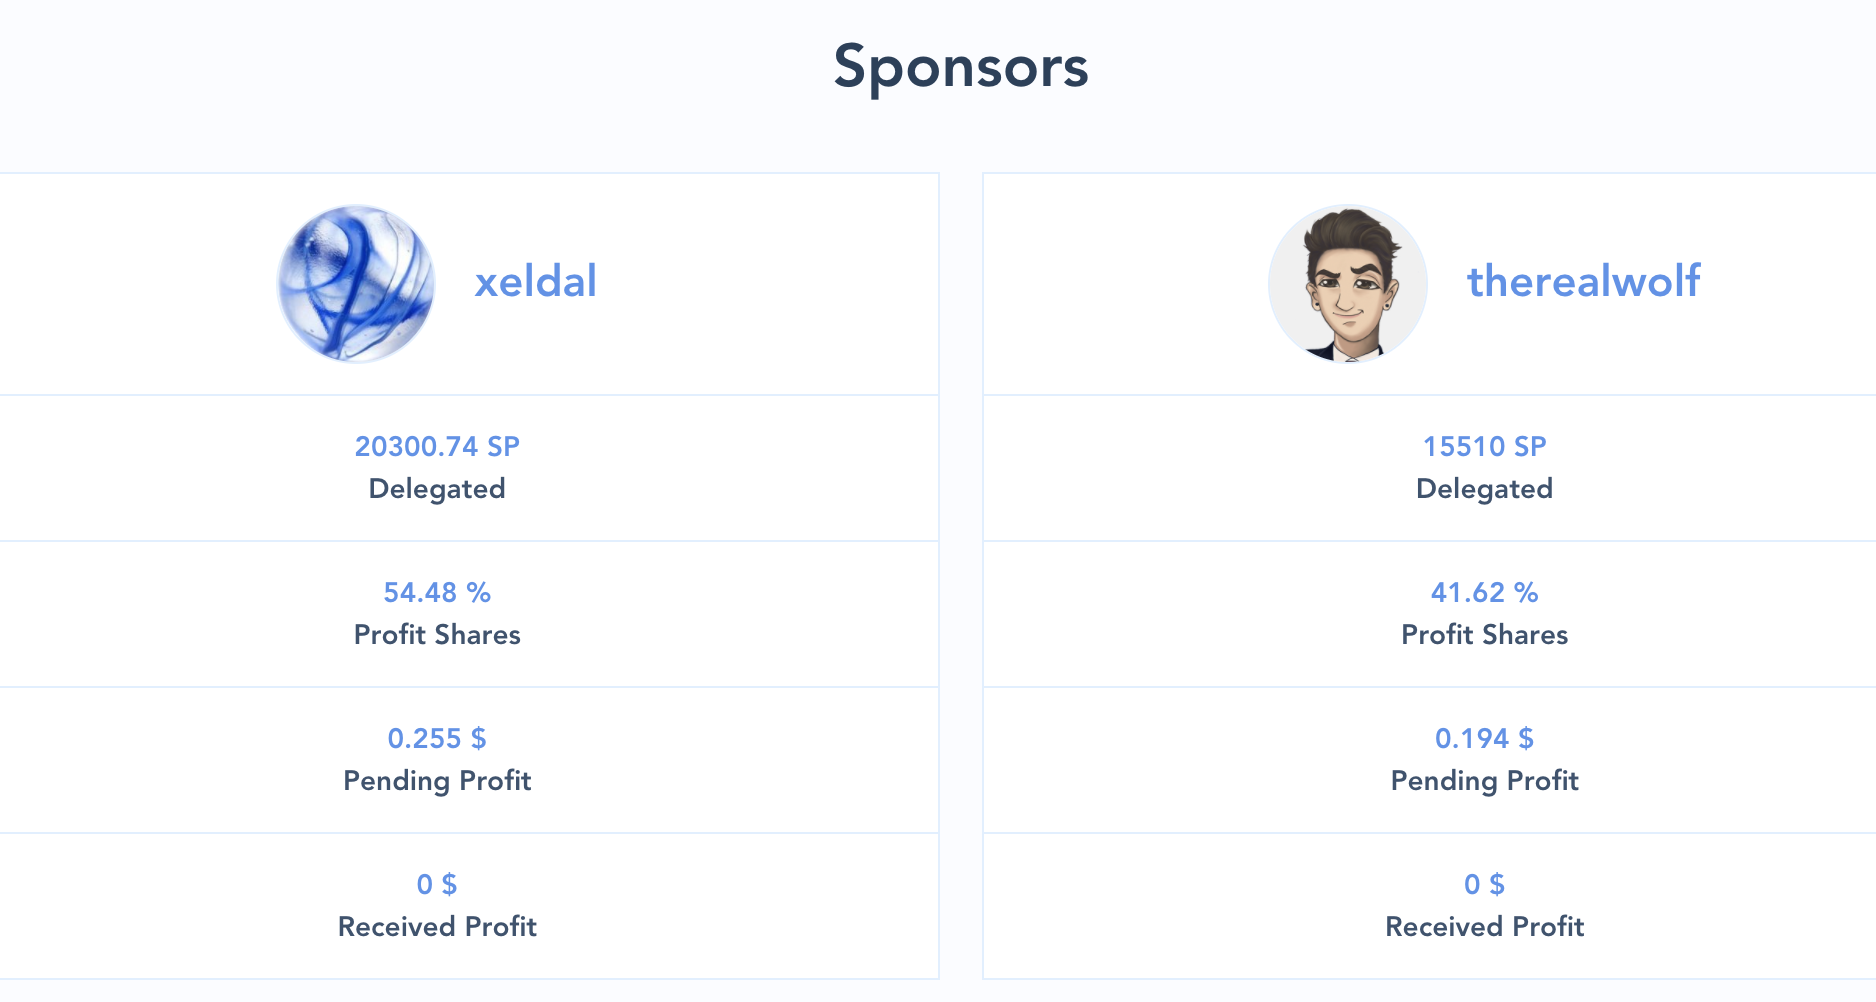 sponsors receive now 50% profit shares - instead of 20% — Steemit